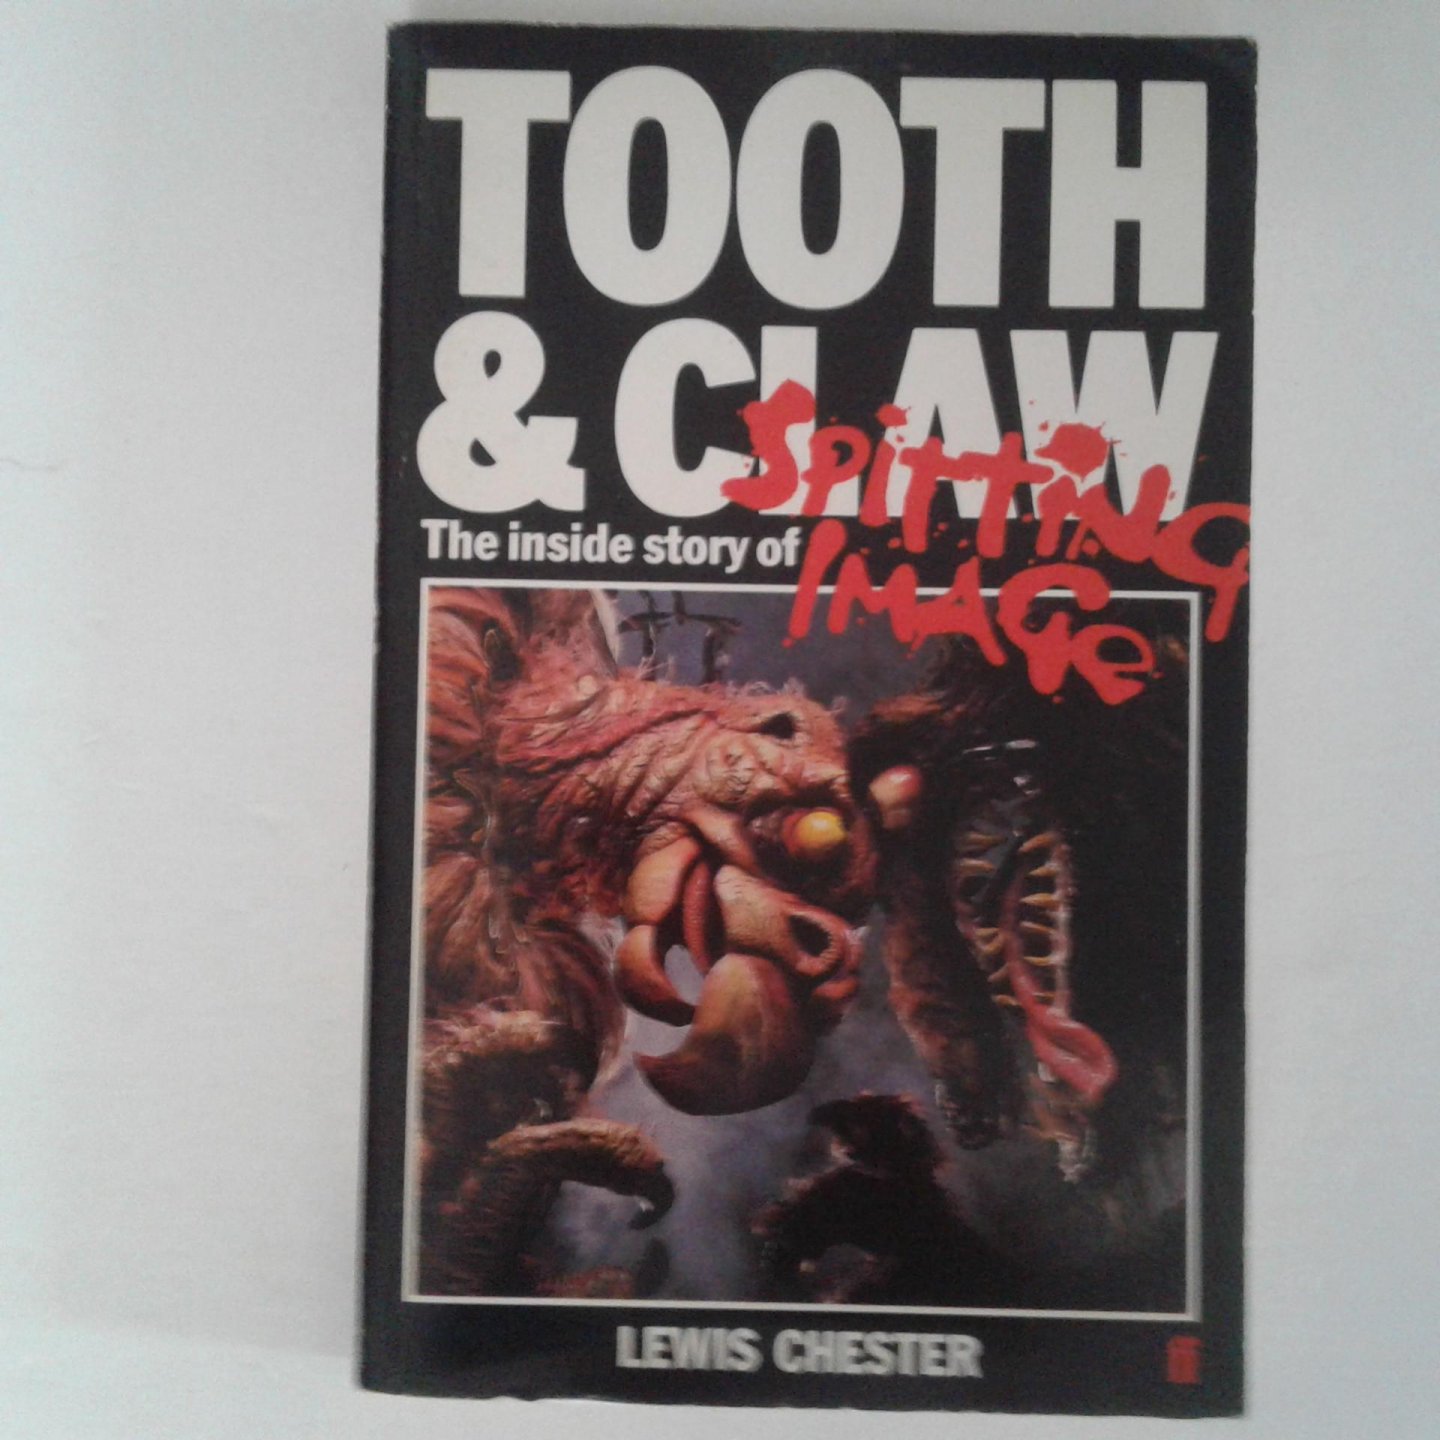 Chester, Lewis - Tooth &Claw ; The inside story of spitting image